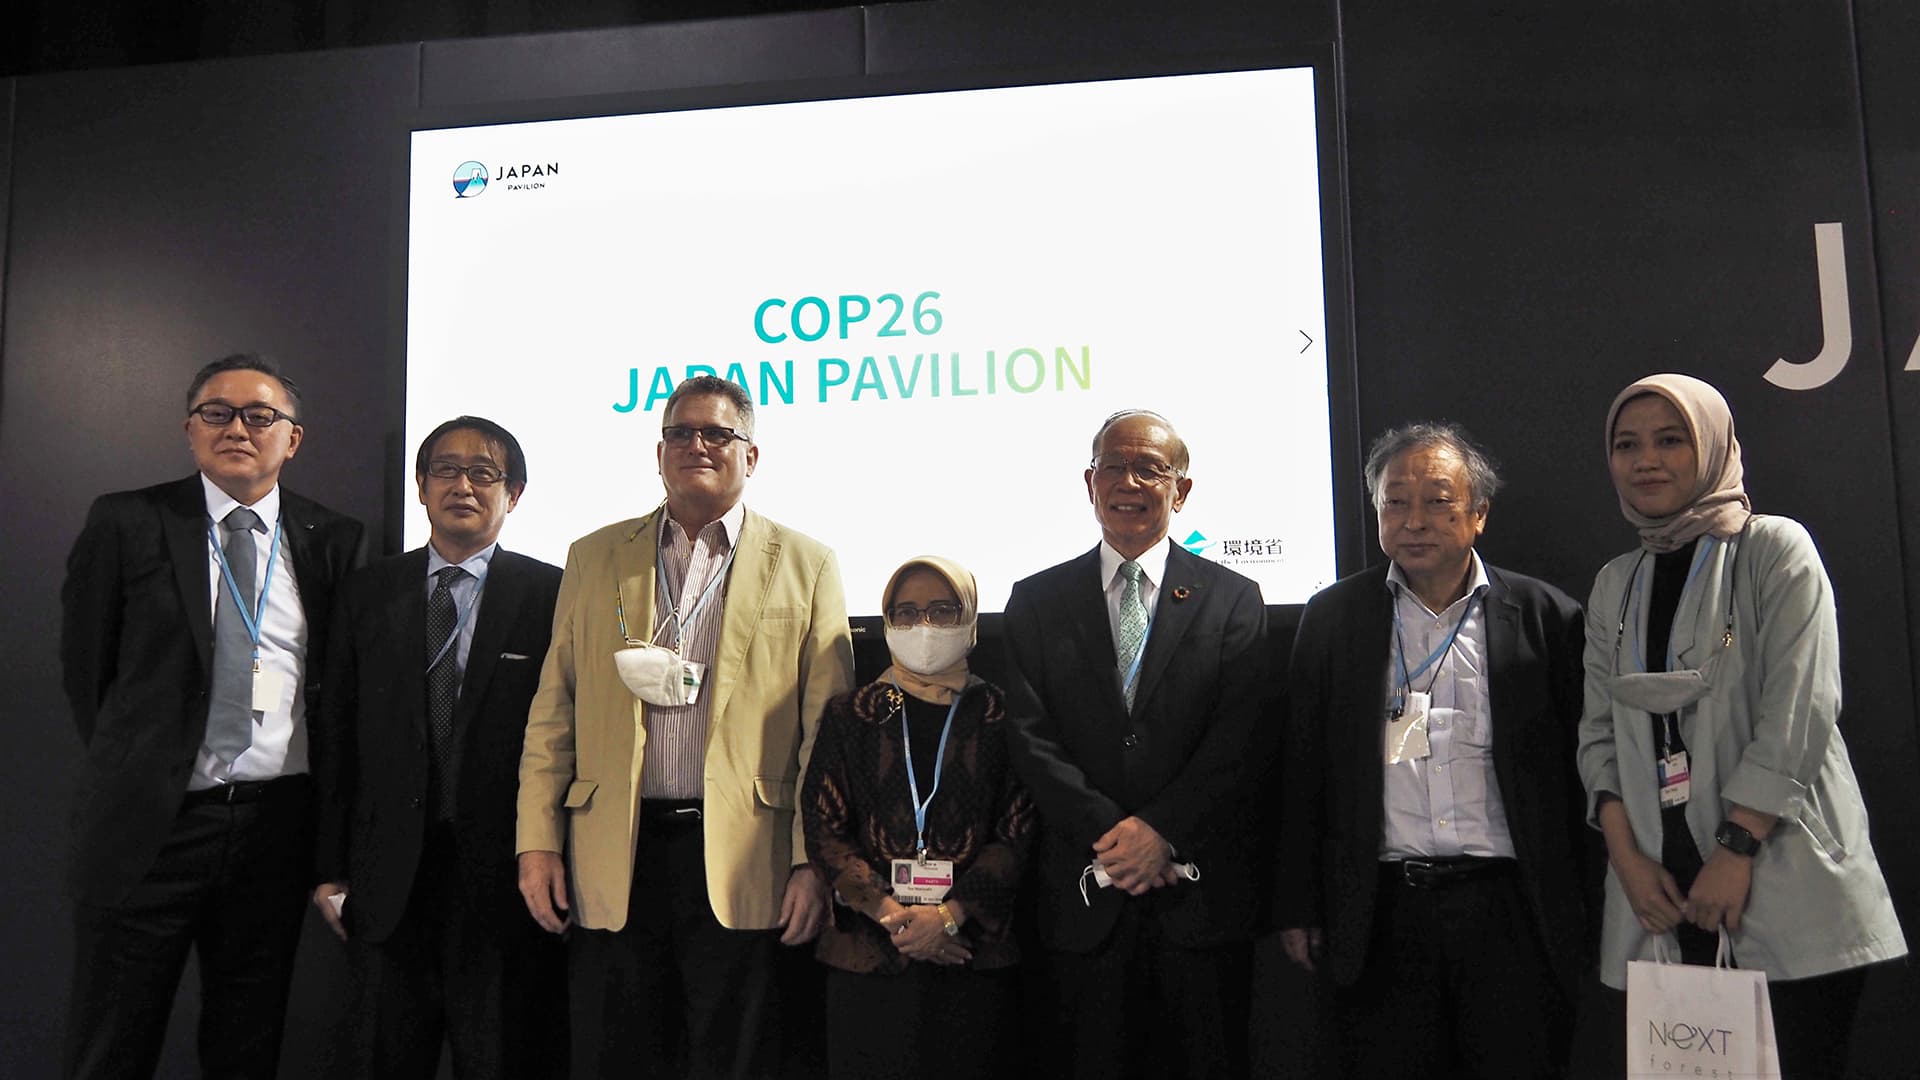 From left: Mr. Kato, President of PT. WSL (Sumitomo Forestry Group), Mr. Shisa, General Manager of Business Development Group of IHI, Dr. Brady, Principal Scientist & Team Leader of CIFOR, Dr. Masripatin, Senior Advisor of Ministry of Environment and Forestry of Indonesia, Mr. Sasabe, Vice President of Sumitomo Forestry, and Ms. Sisva, staff of WSL